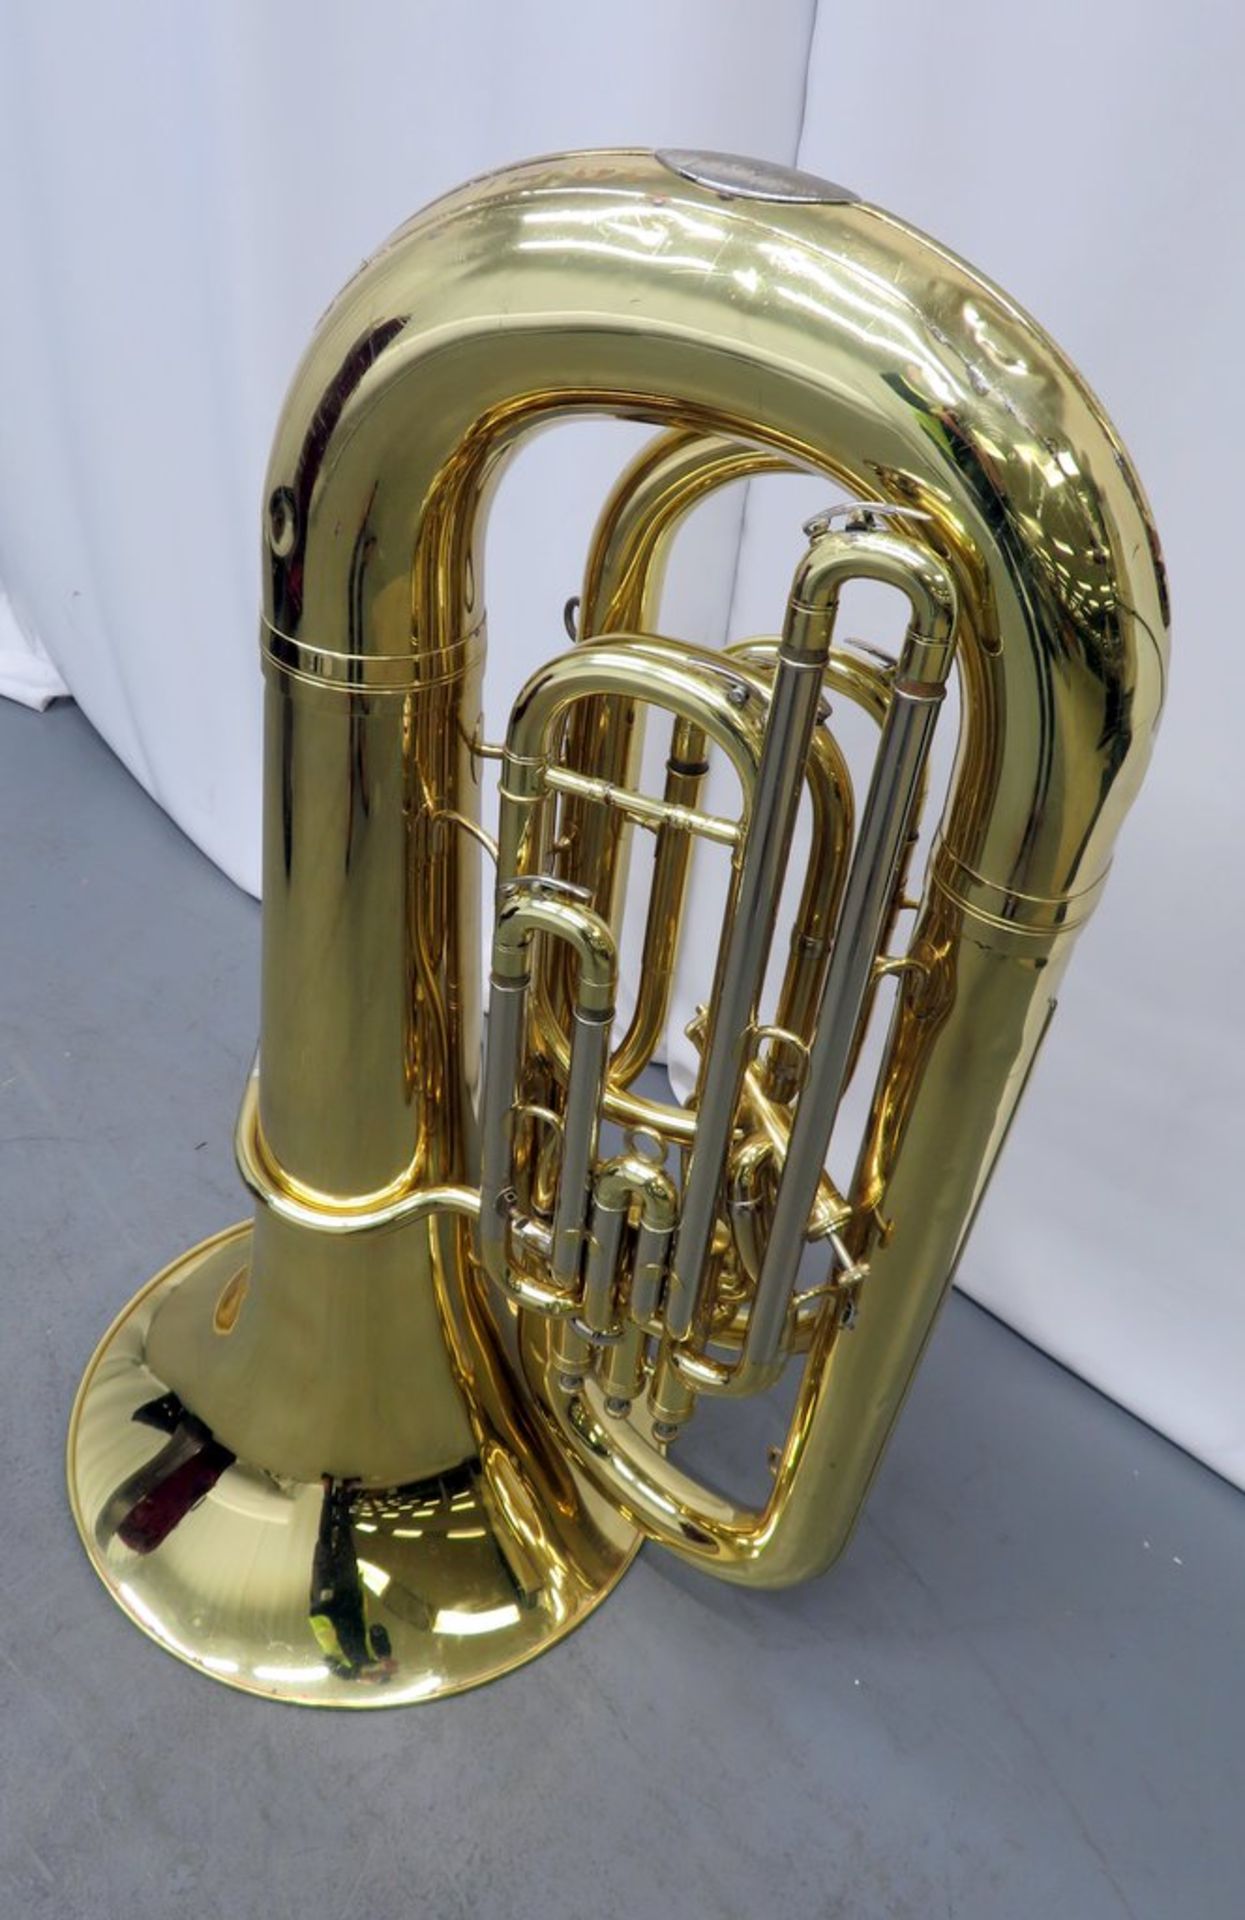 Besson BE994 Sovereign Bass Upright Tuba Complete With Case. - Image 5 of 23